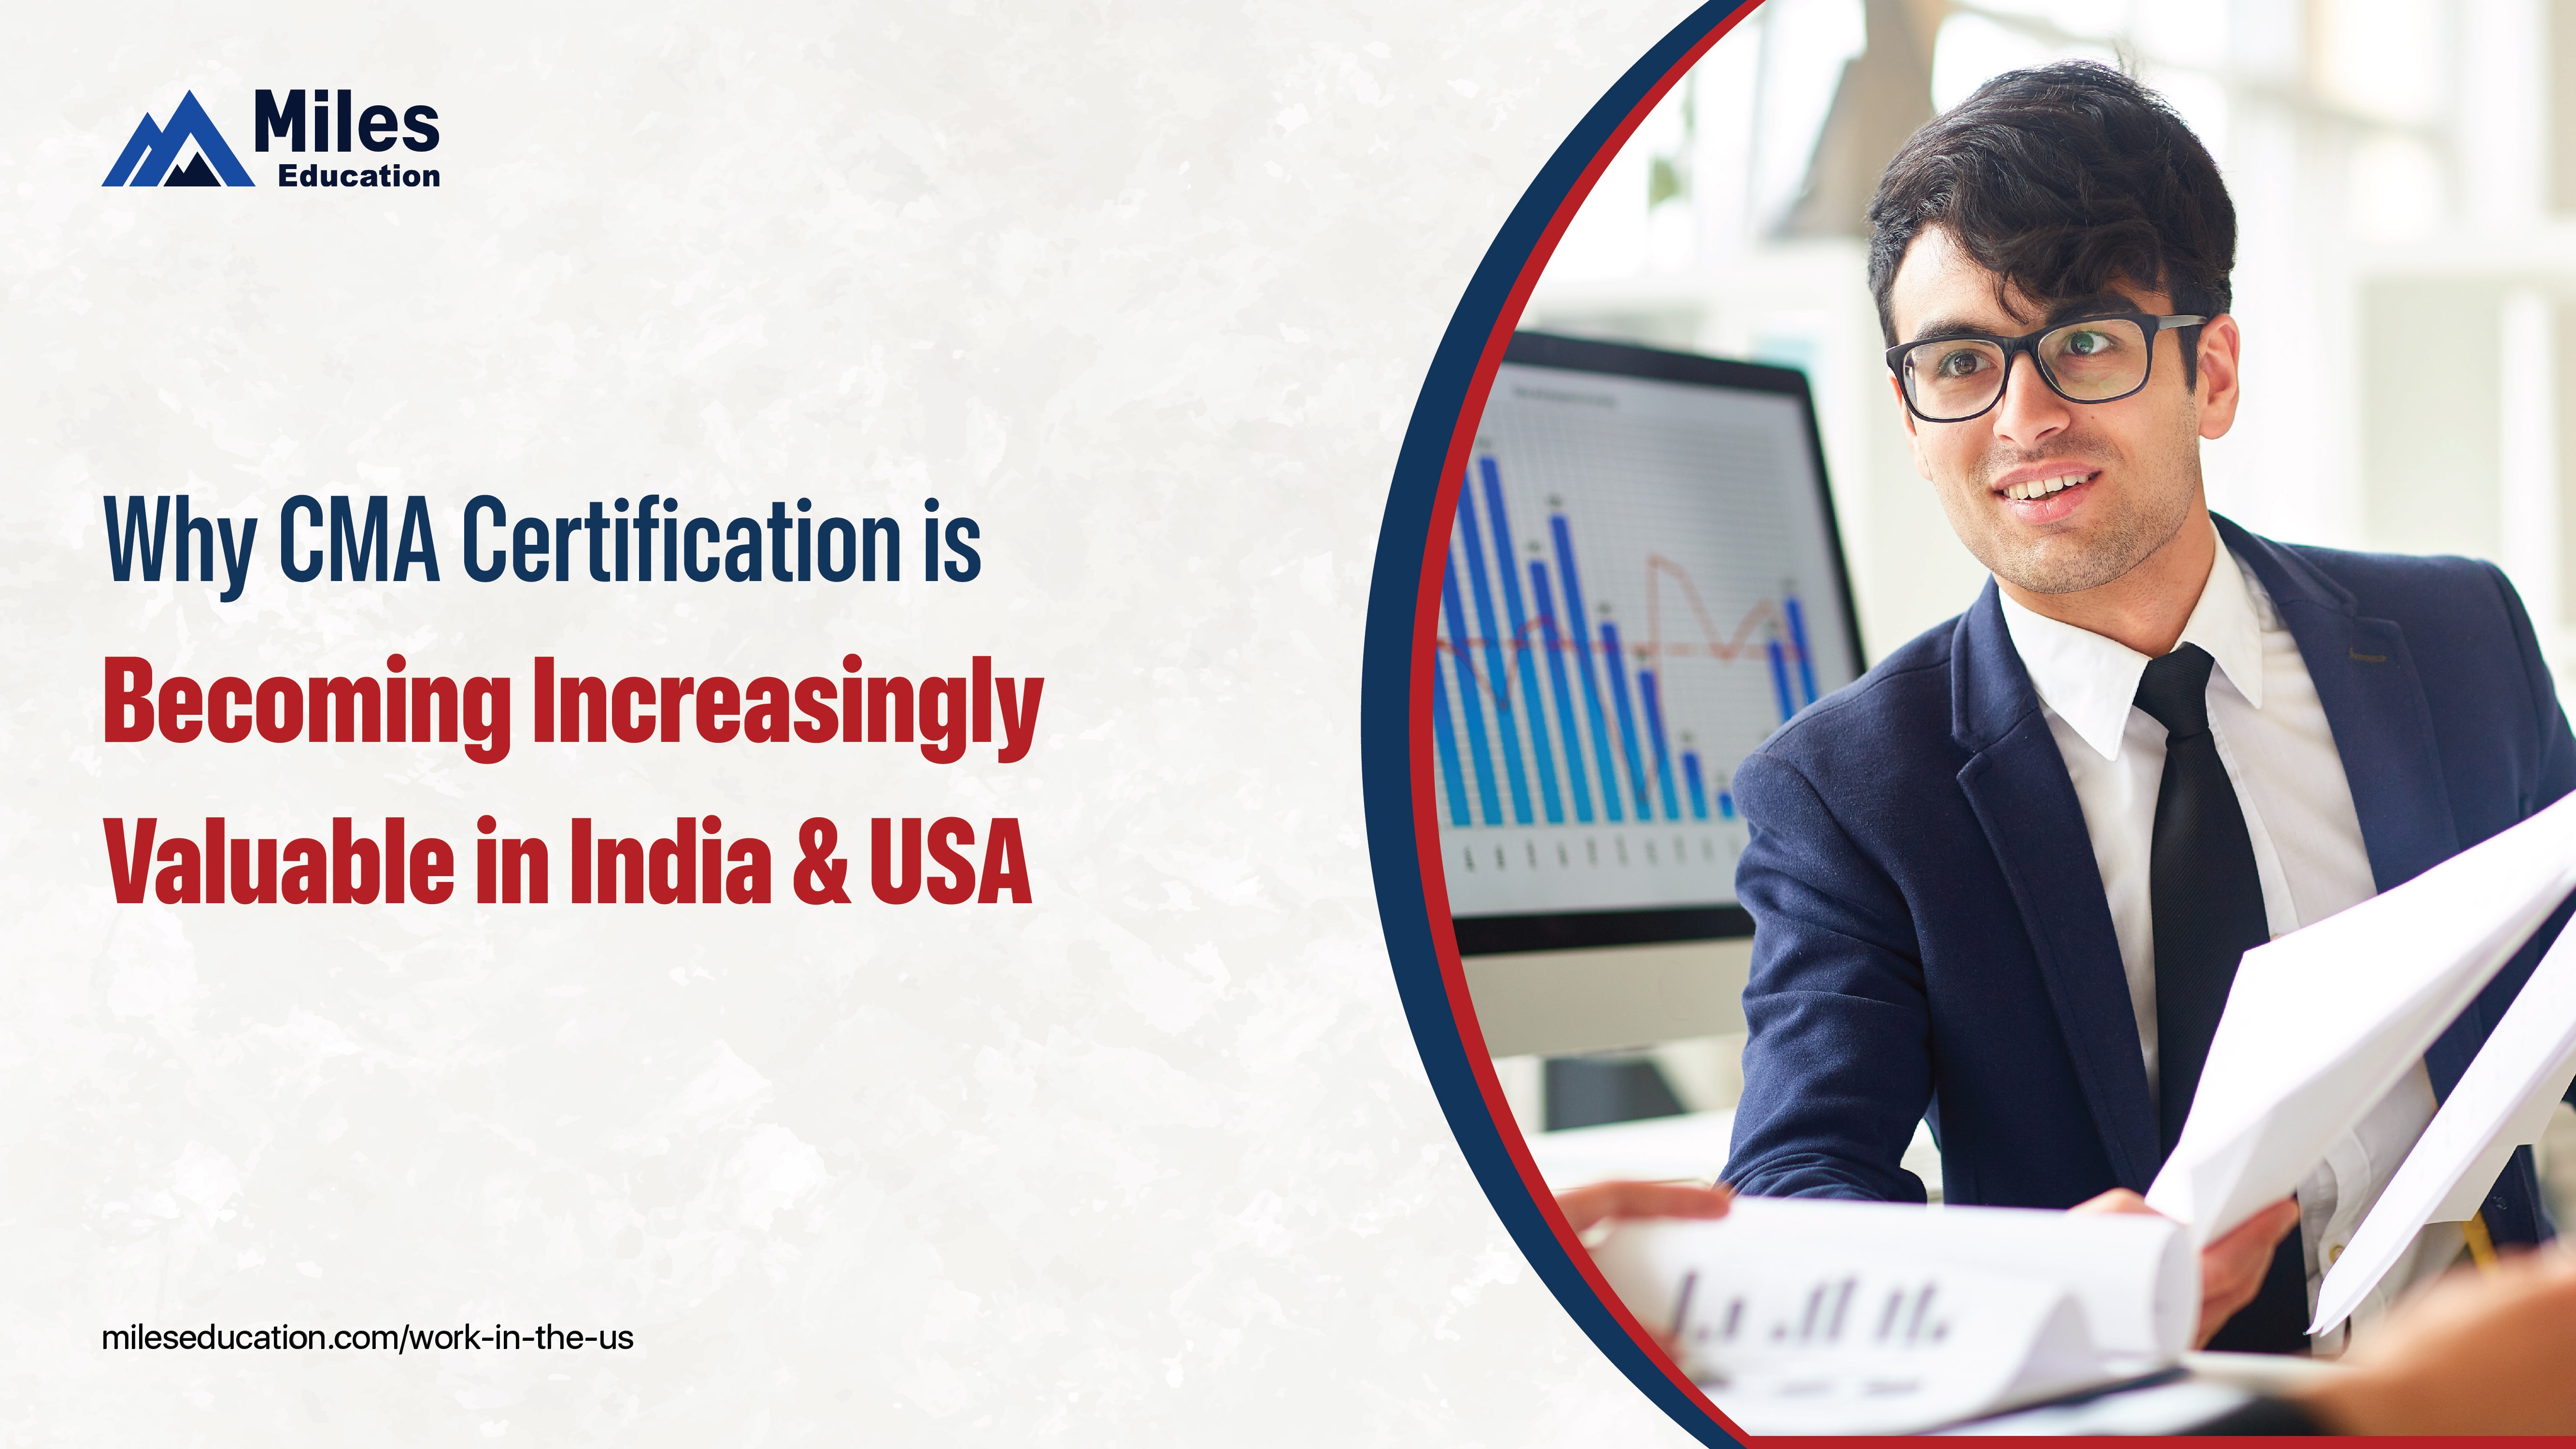 Why CMA Certification is Becoming Increasingly Valuable in India & USA